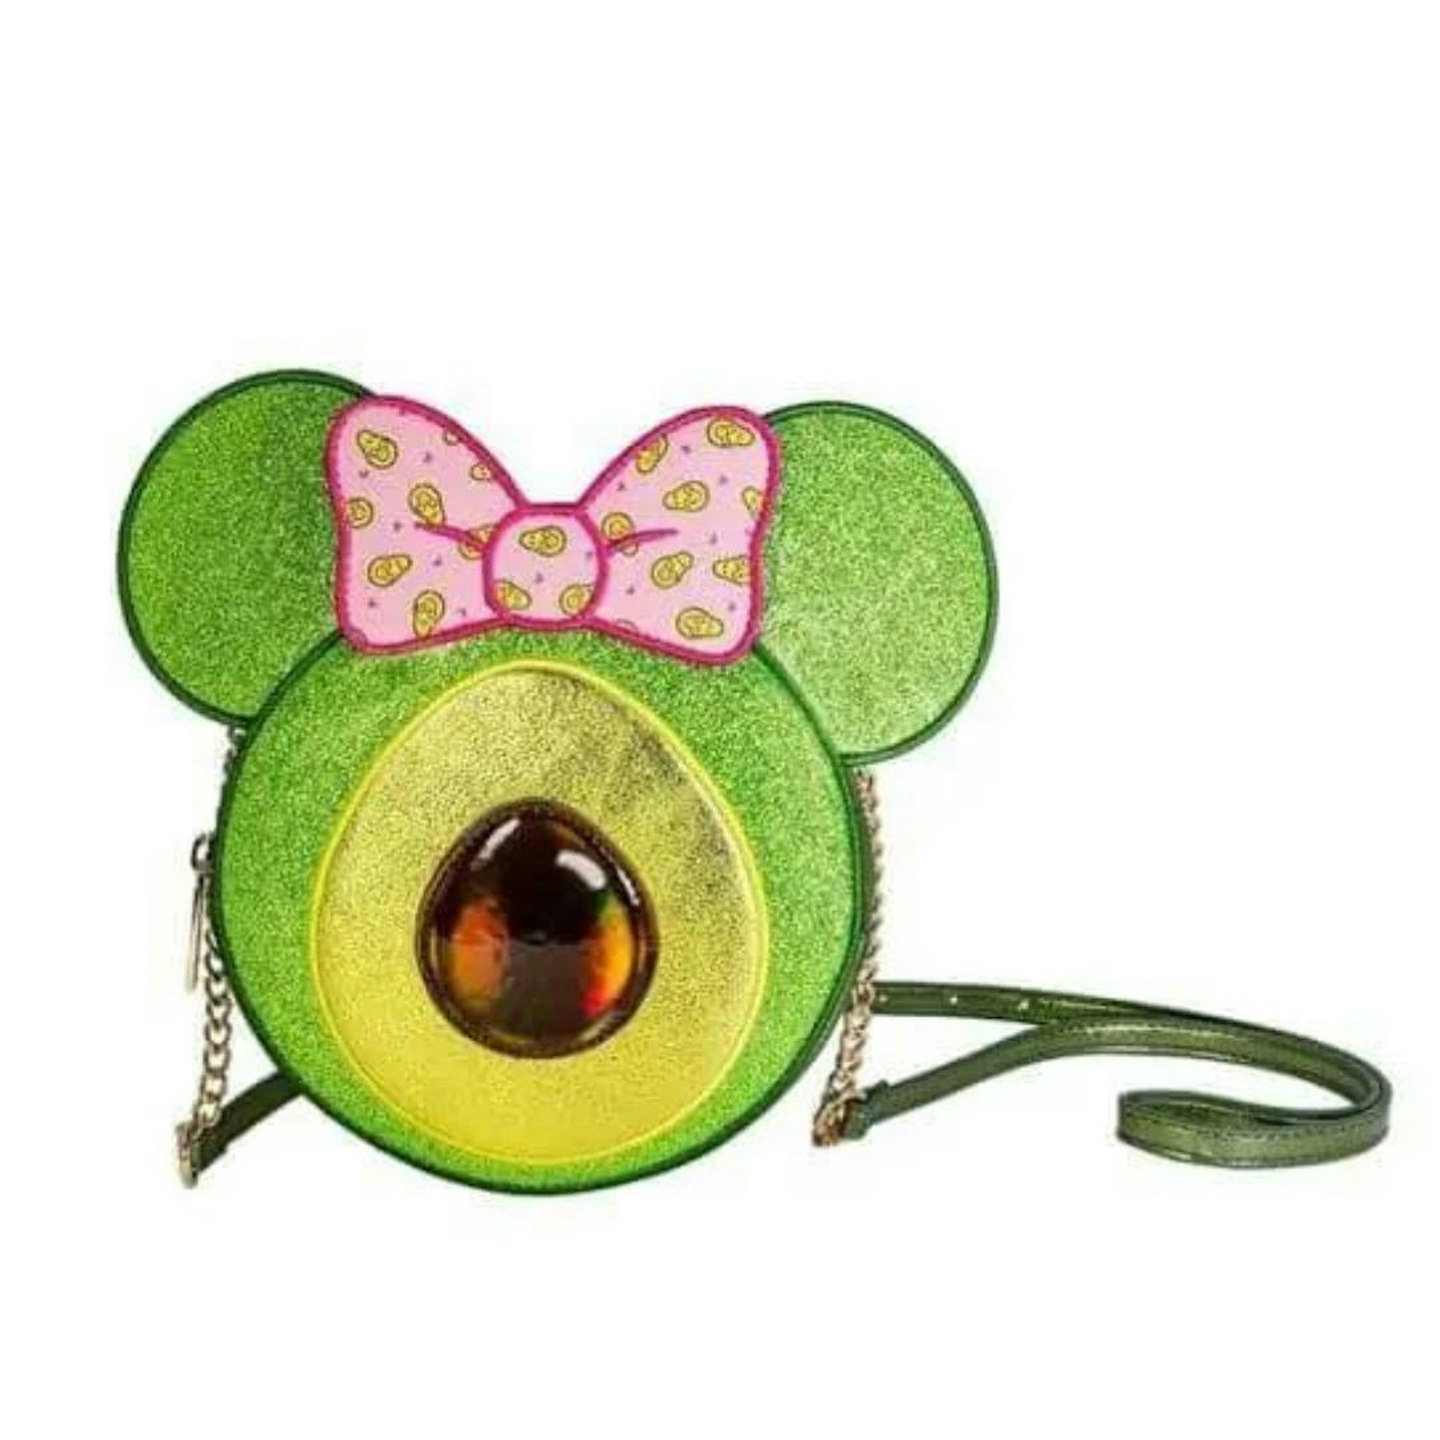 Best Christmas Gifts For Kids: Danielle Nicole Minnie Mouse Avocado Cross Body Bag